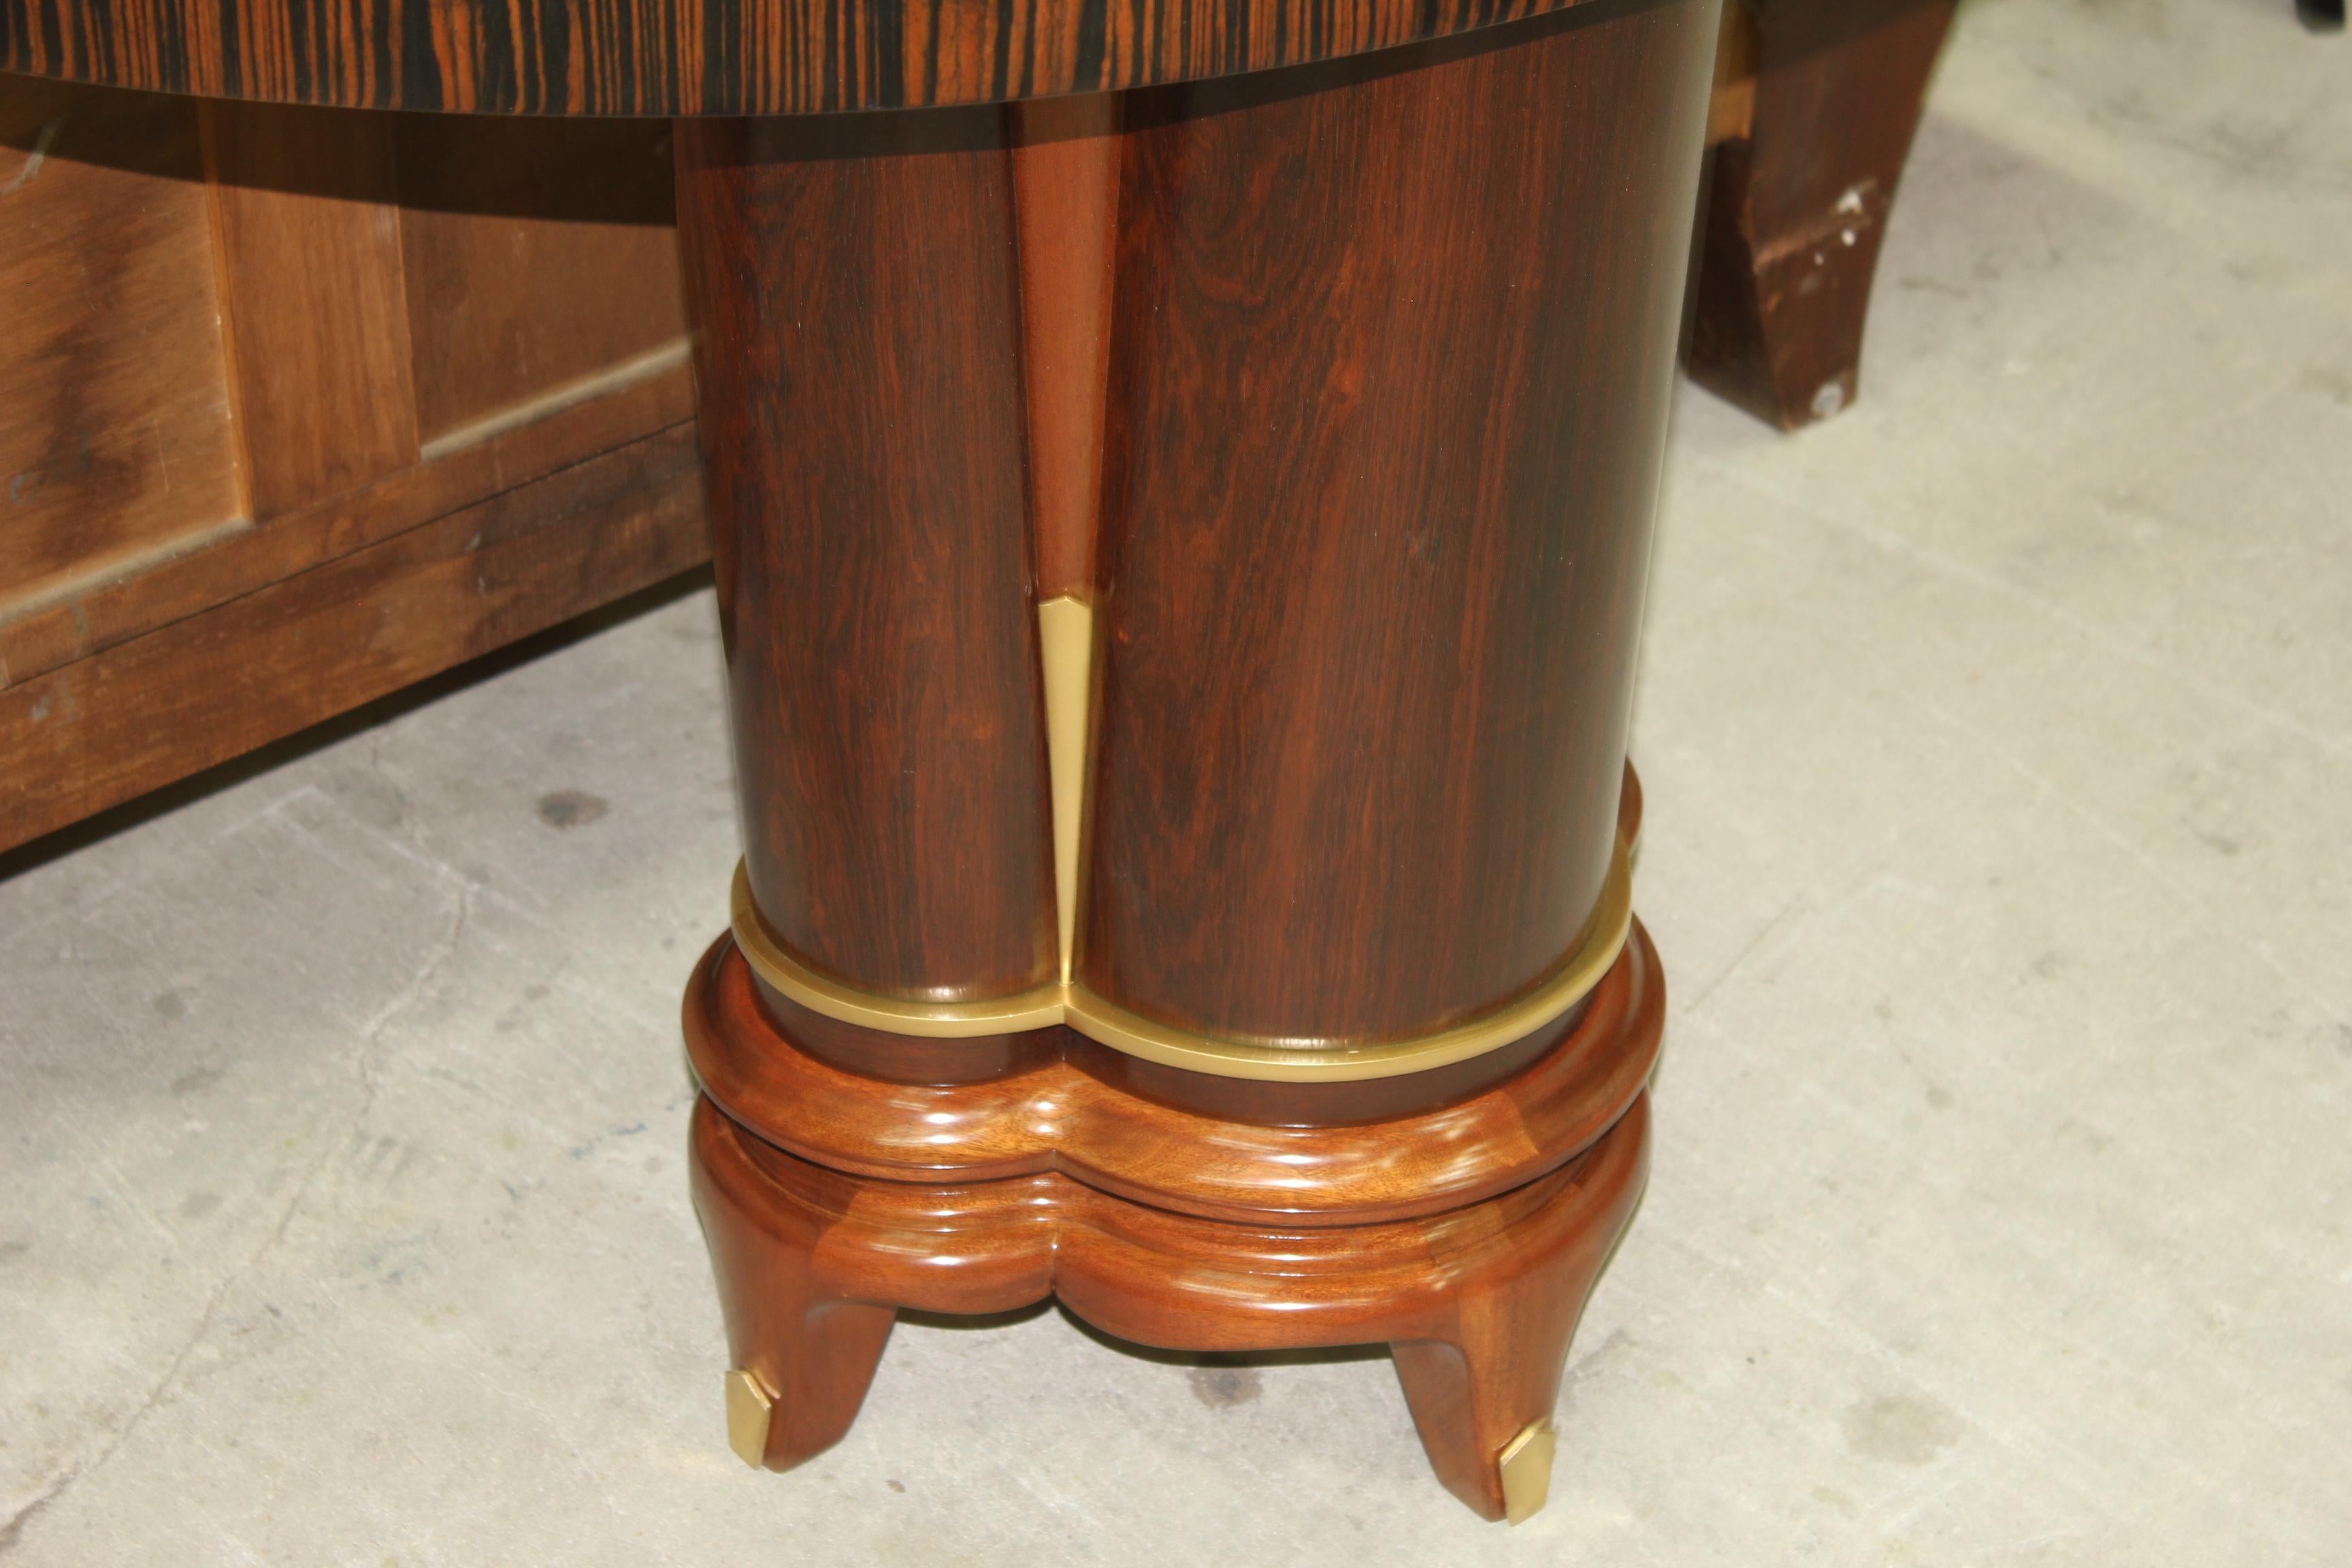 French Art Deco Exotic Macassar Ebony Console Tables, circa 1940s For Sale 9